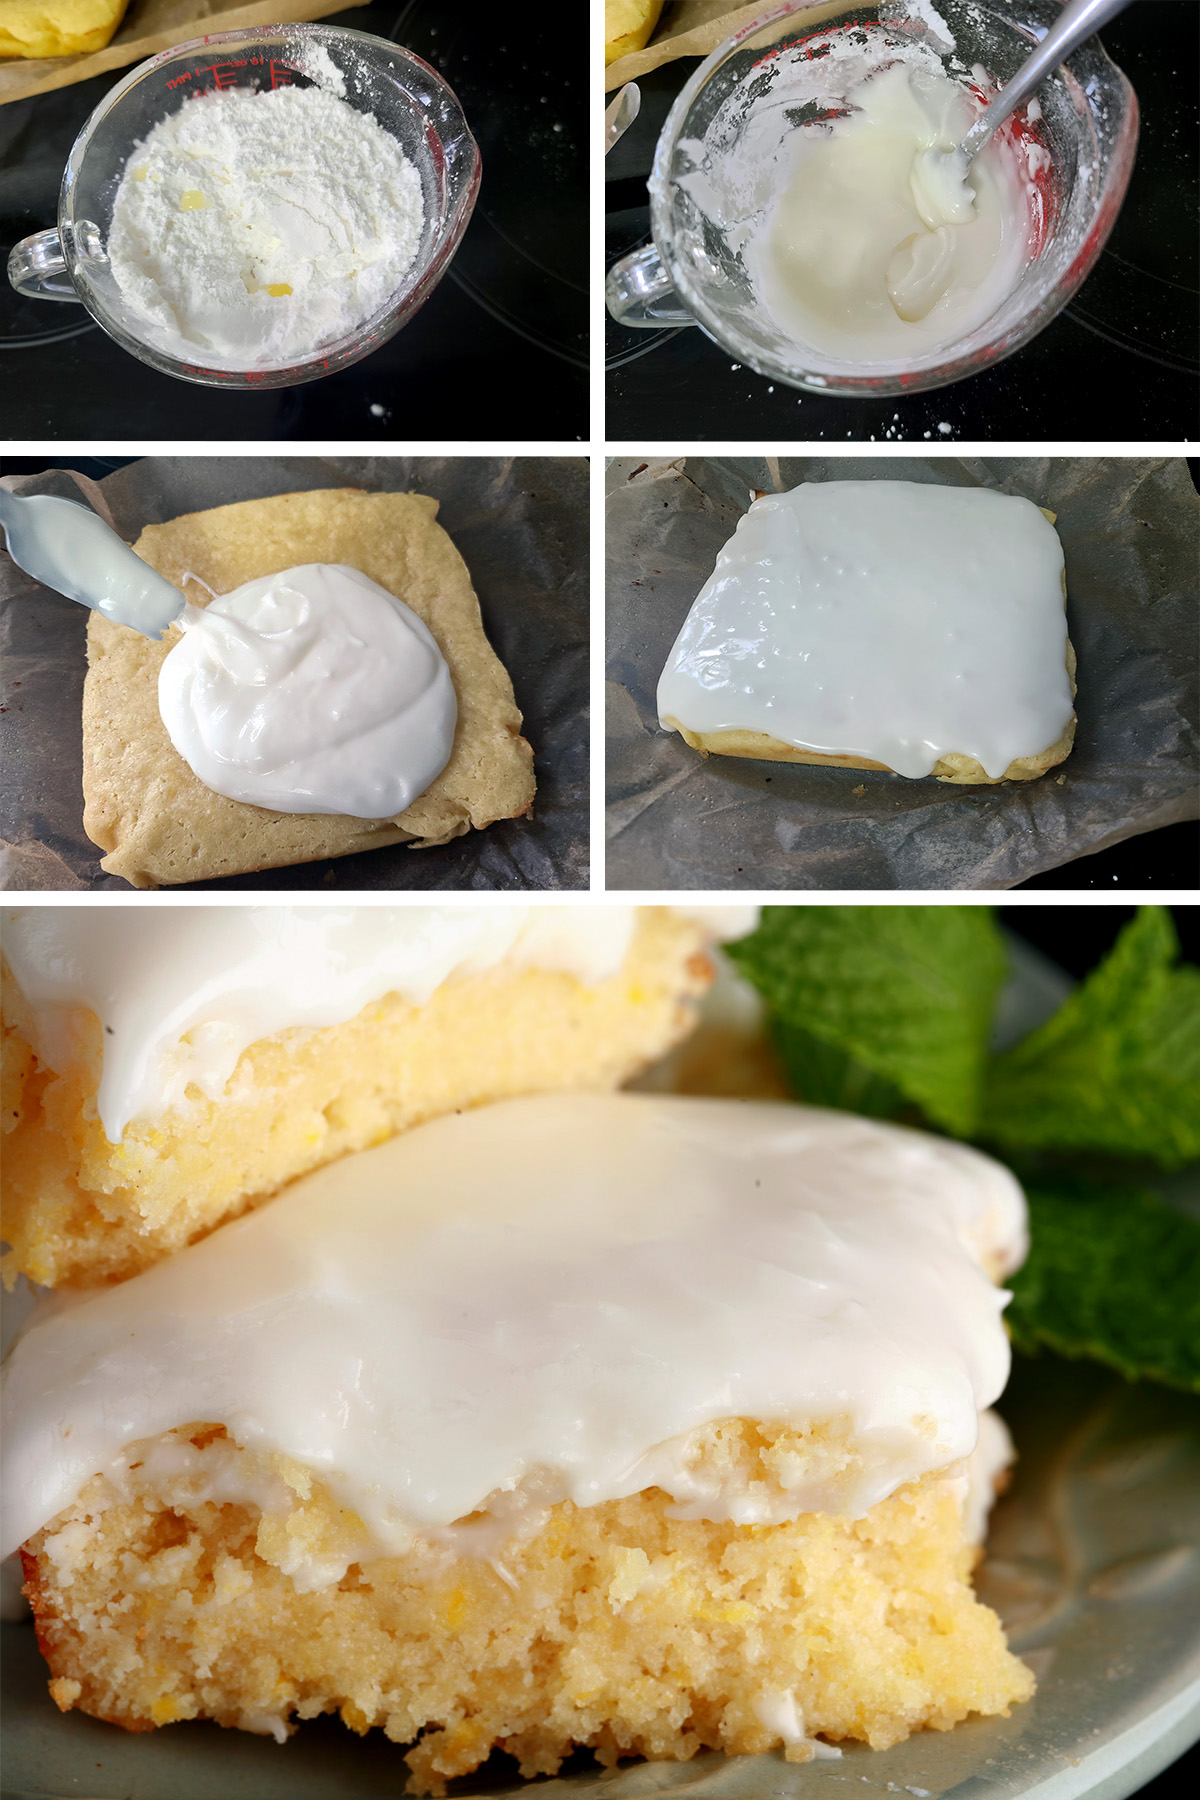 A 5 part image showing the frosting being mixed and spread on the gluten free lemon bars.